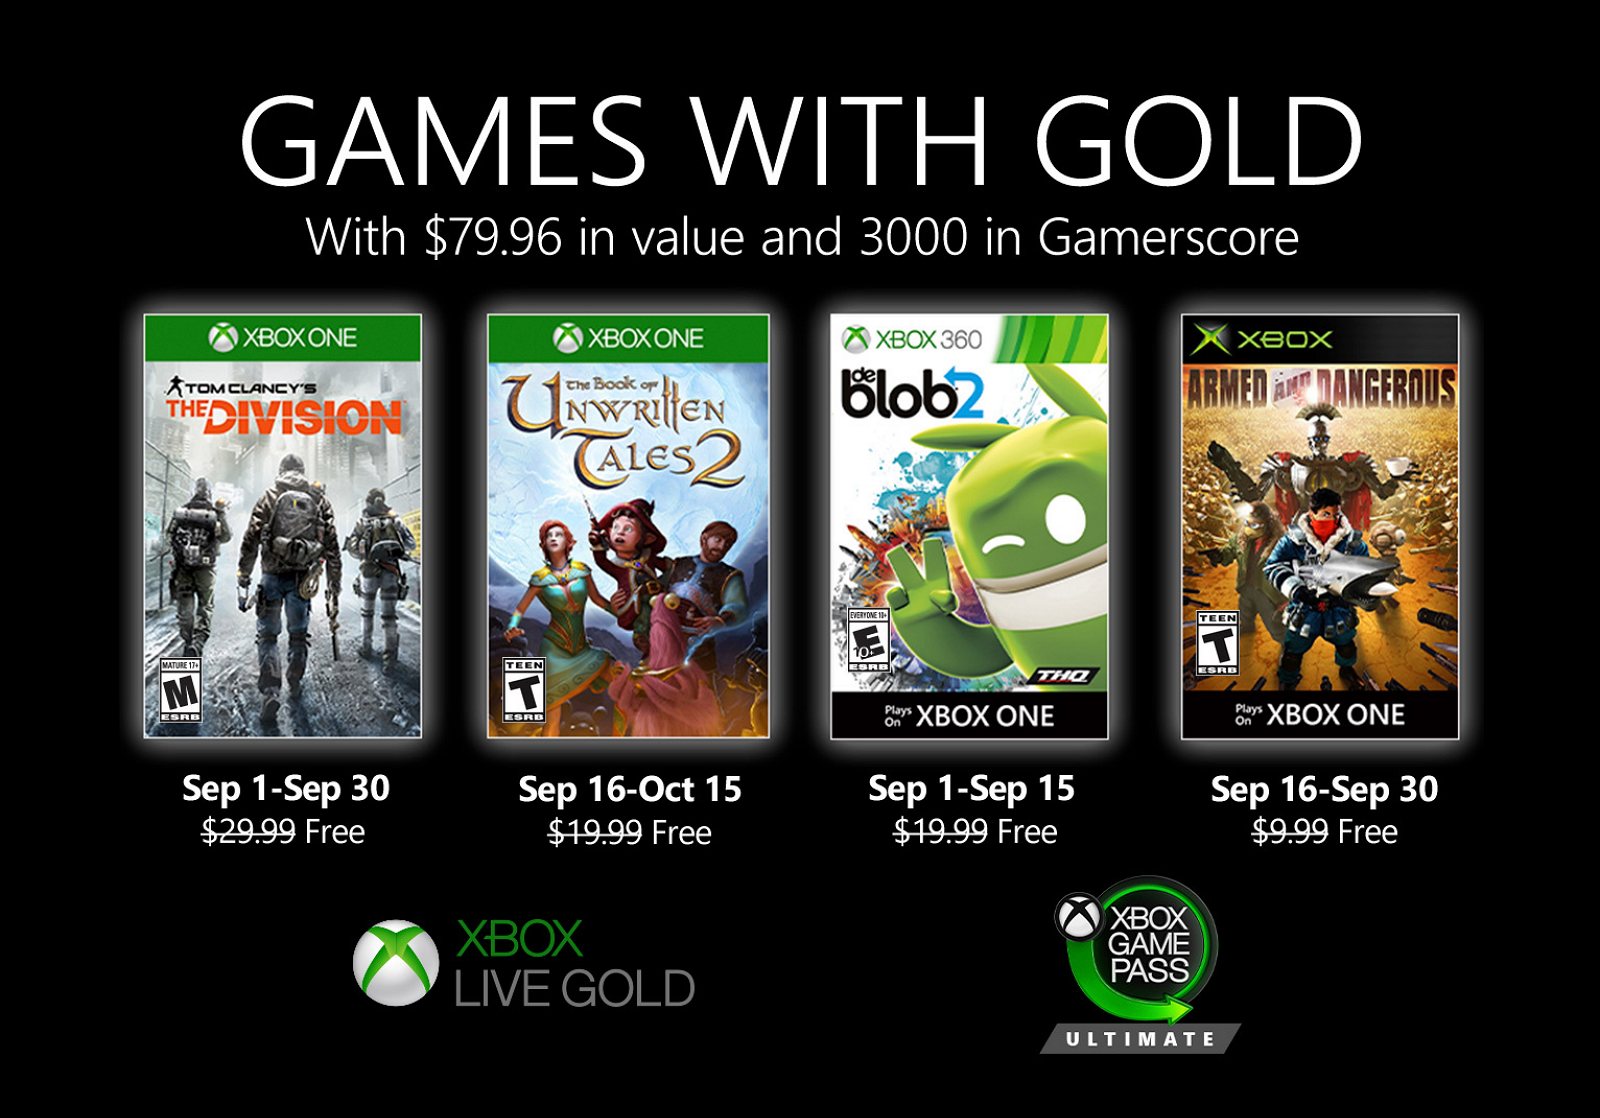 Xbox Announces September's Games with Gold - KeenGamer